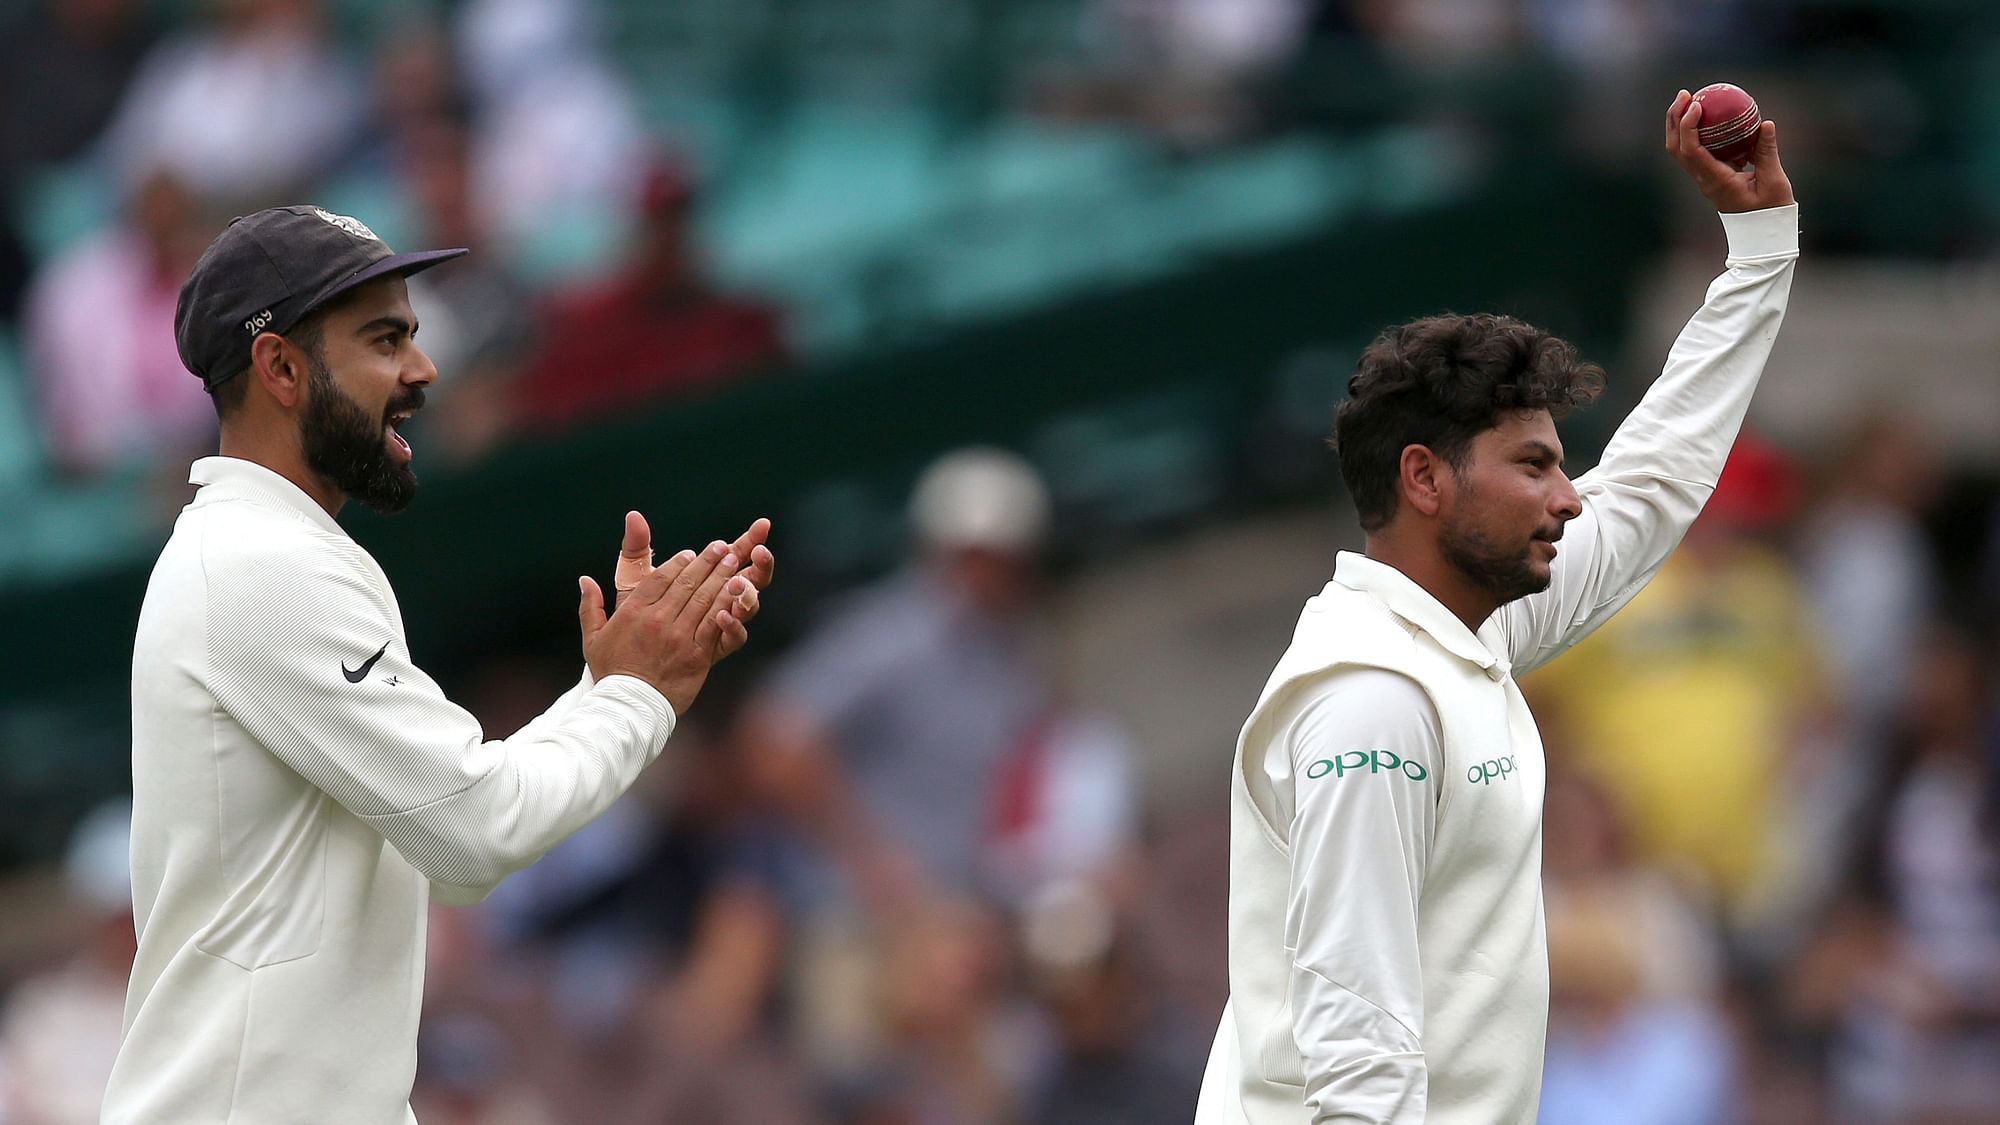 Kuldeep Yadav took five wickets and India took a big stride towards winning its first Test at the Sydney Cricket Ground in 40 years.